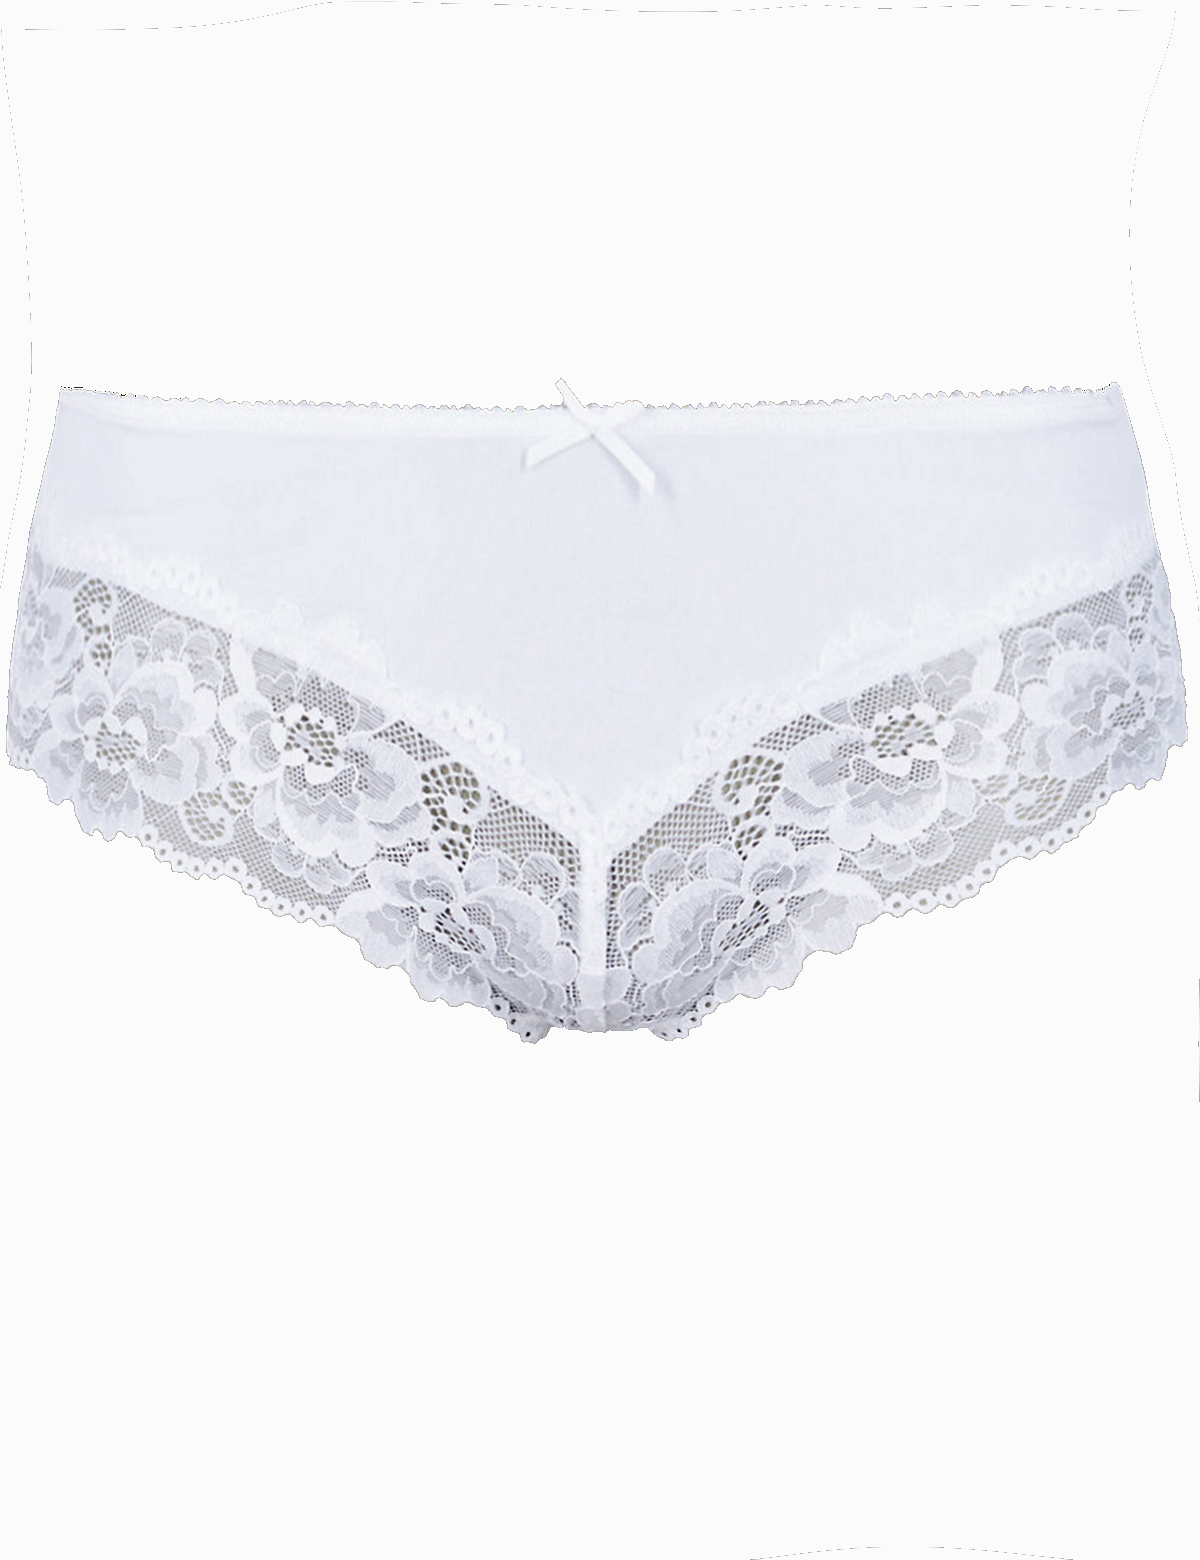 Marks /& Spencers White Floral Lace Brazilian Knickers